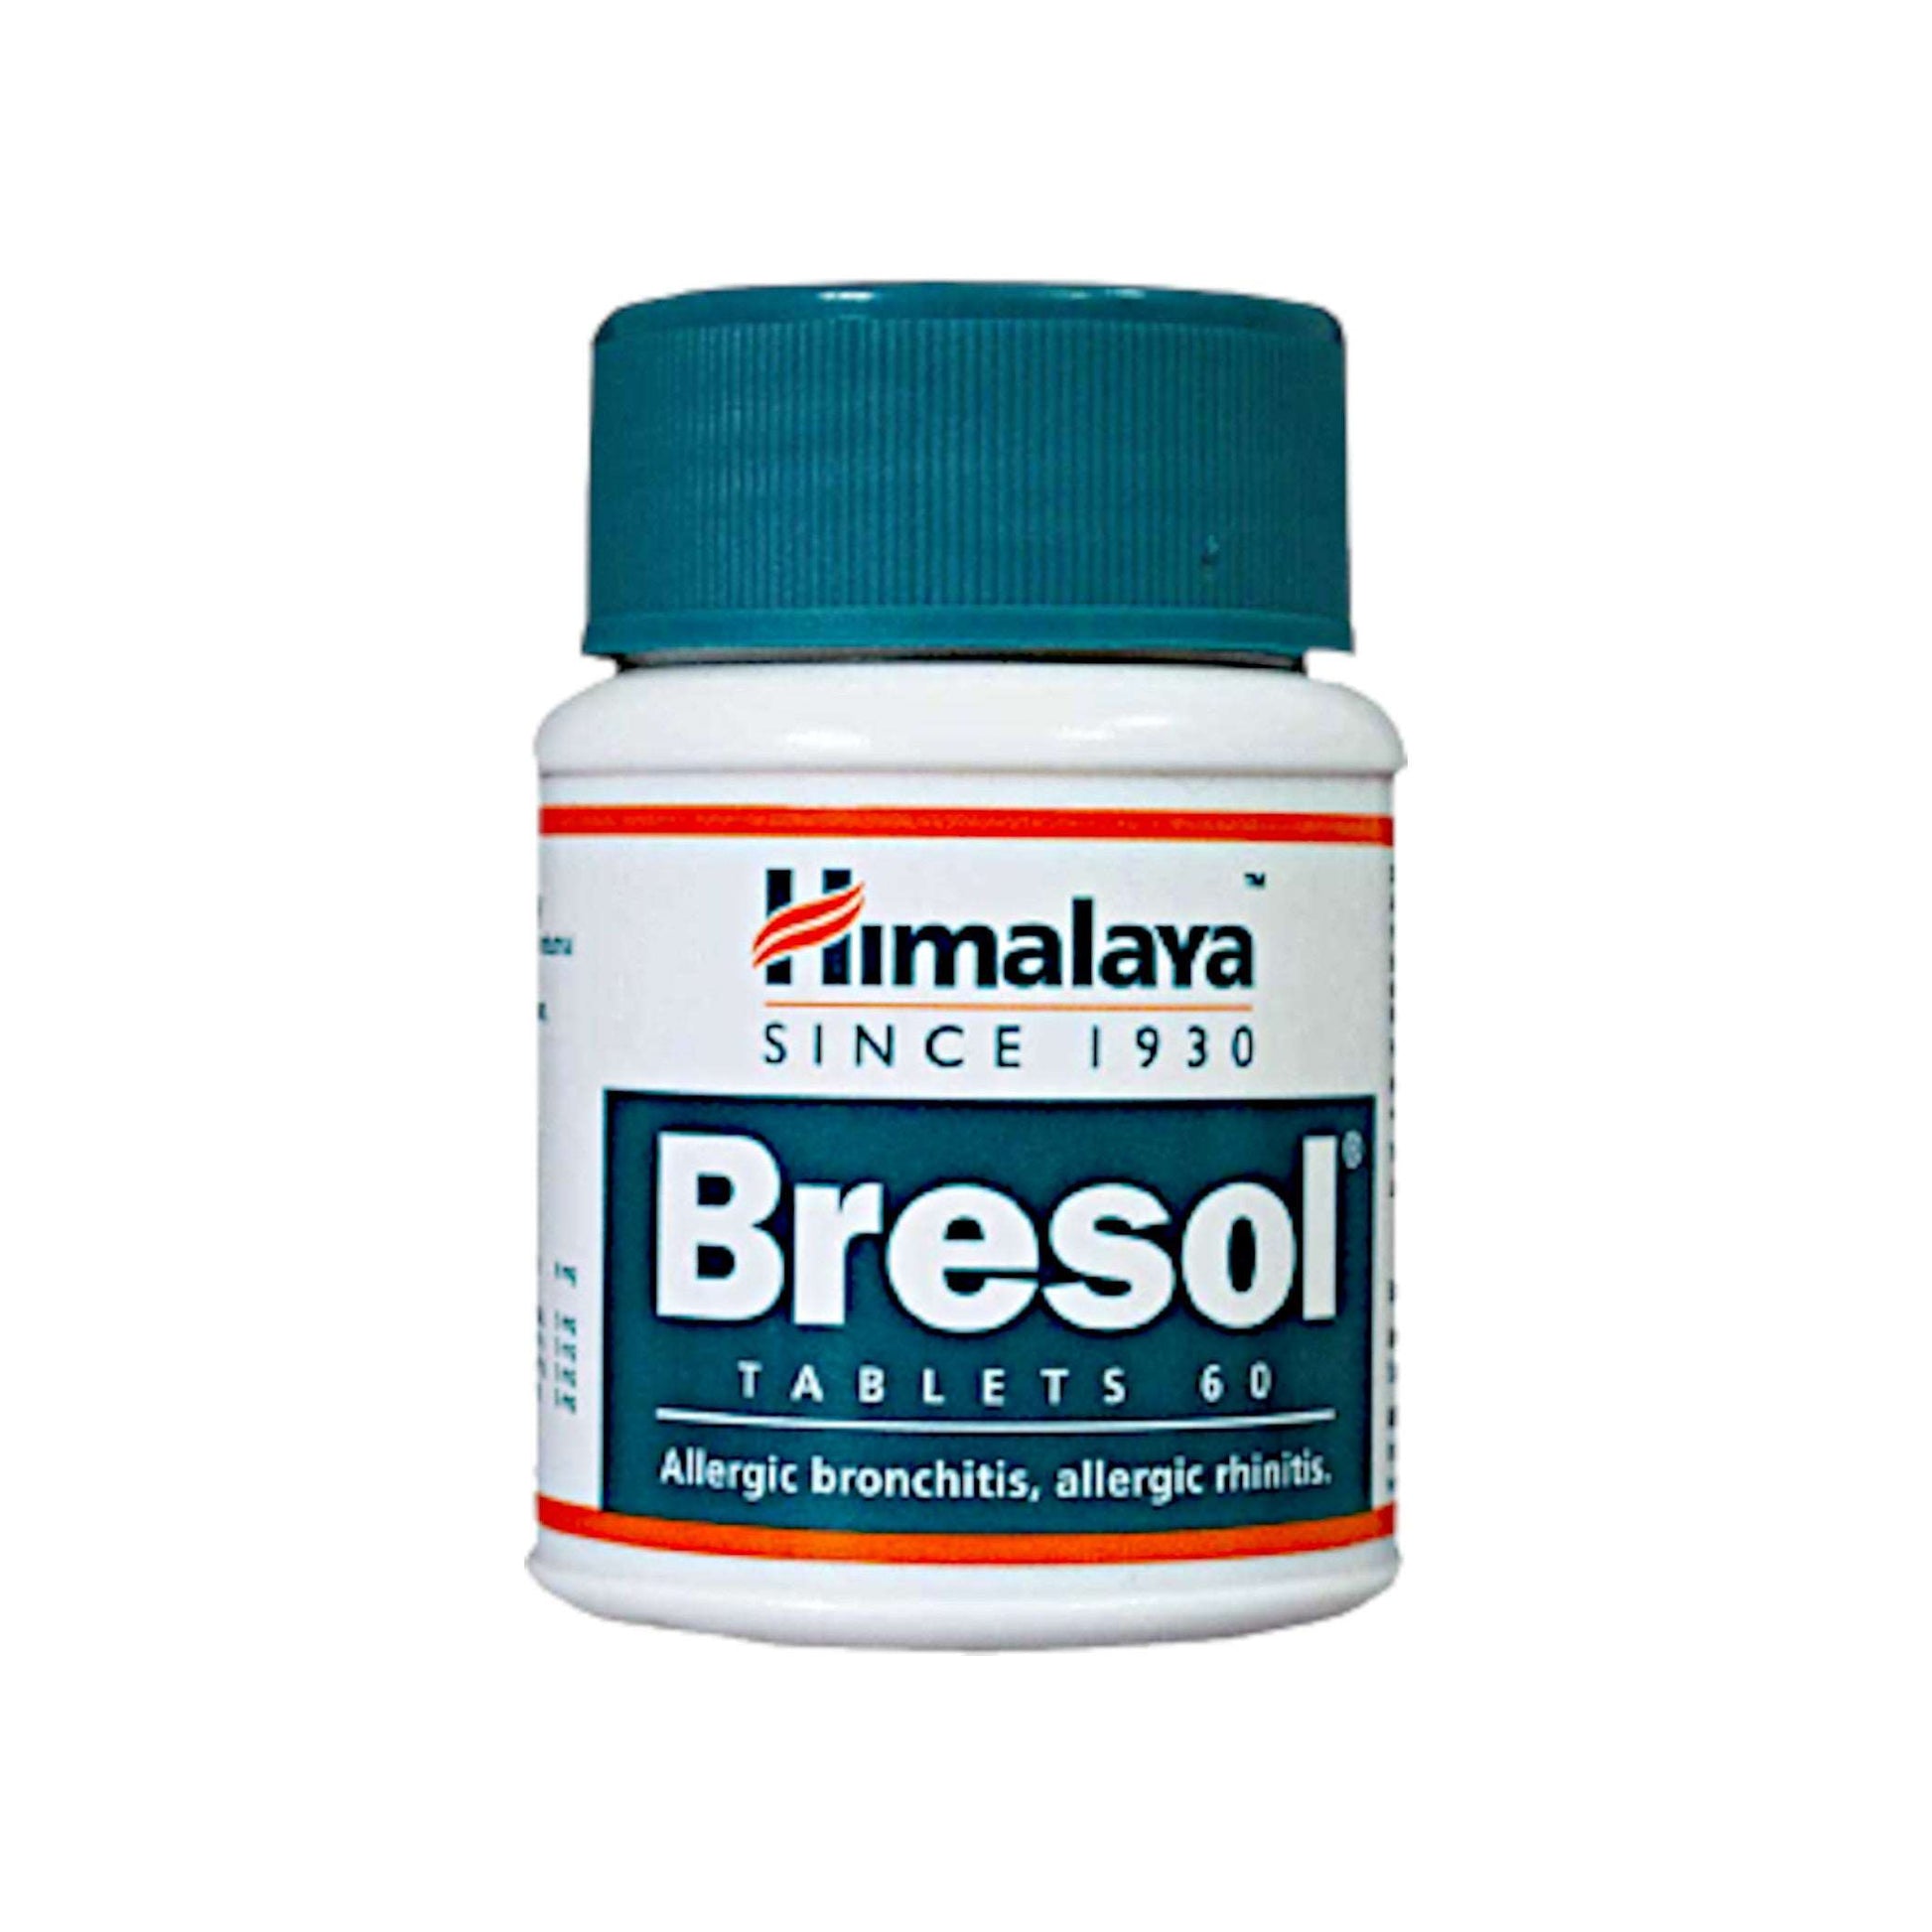 Image: Himalaya Herbals - Bresol Tablets - A solution for chronic respiratory allergies with anti-inflammatory properties.